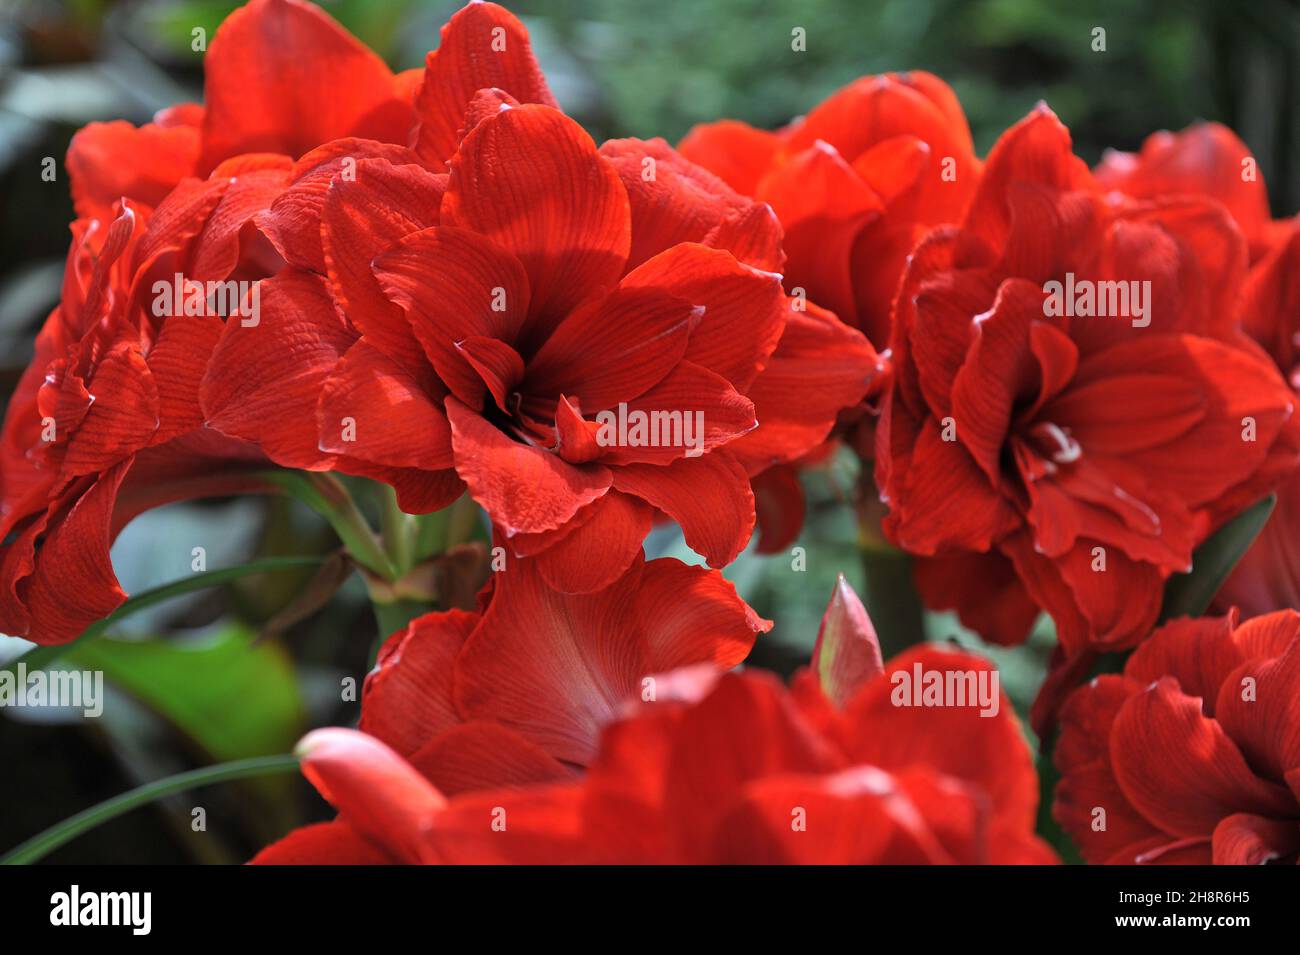 Red double-flowered hippeastrum (Amaryllis) Double Dragon blooms in a garden in April Stock Photo